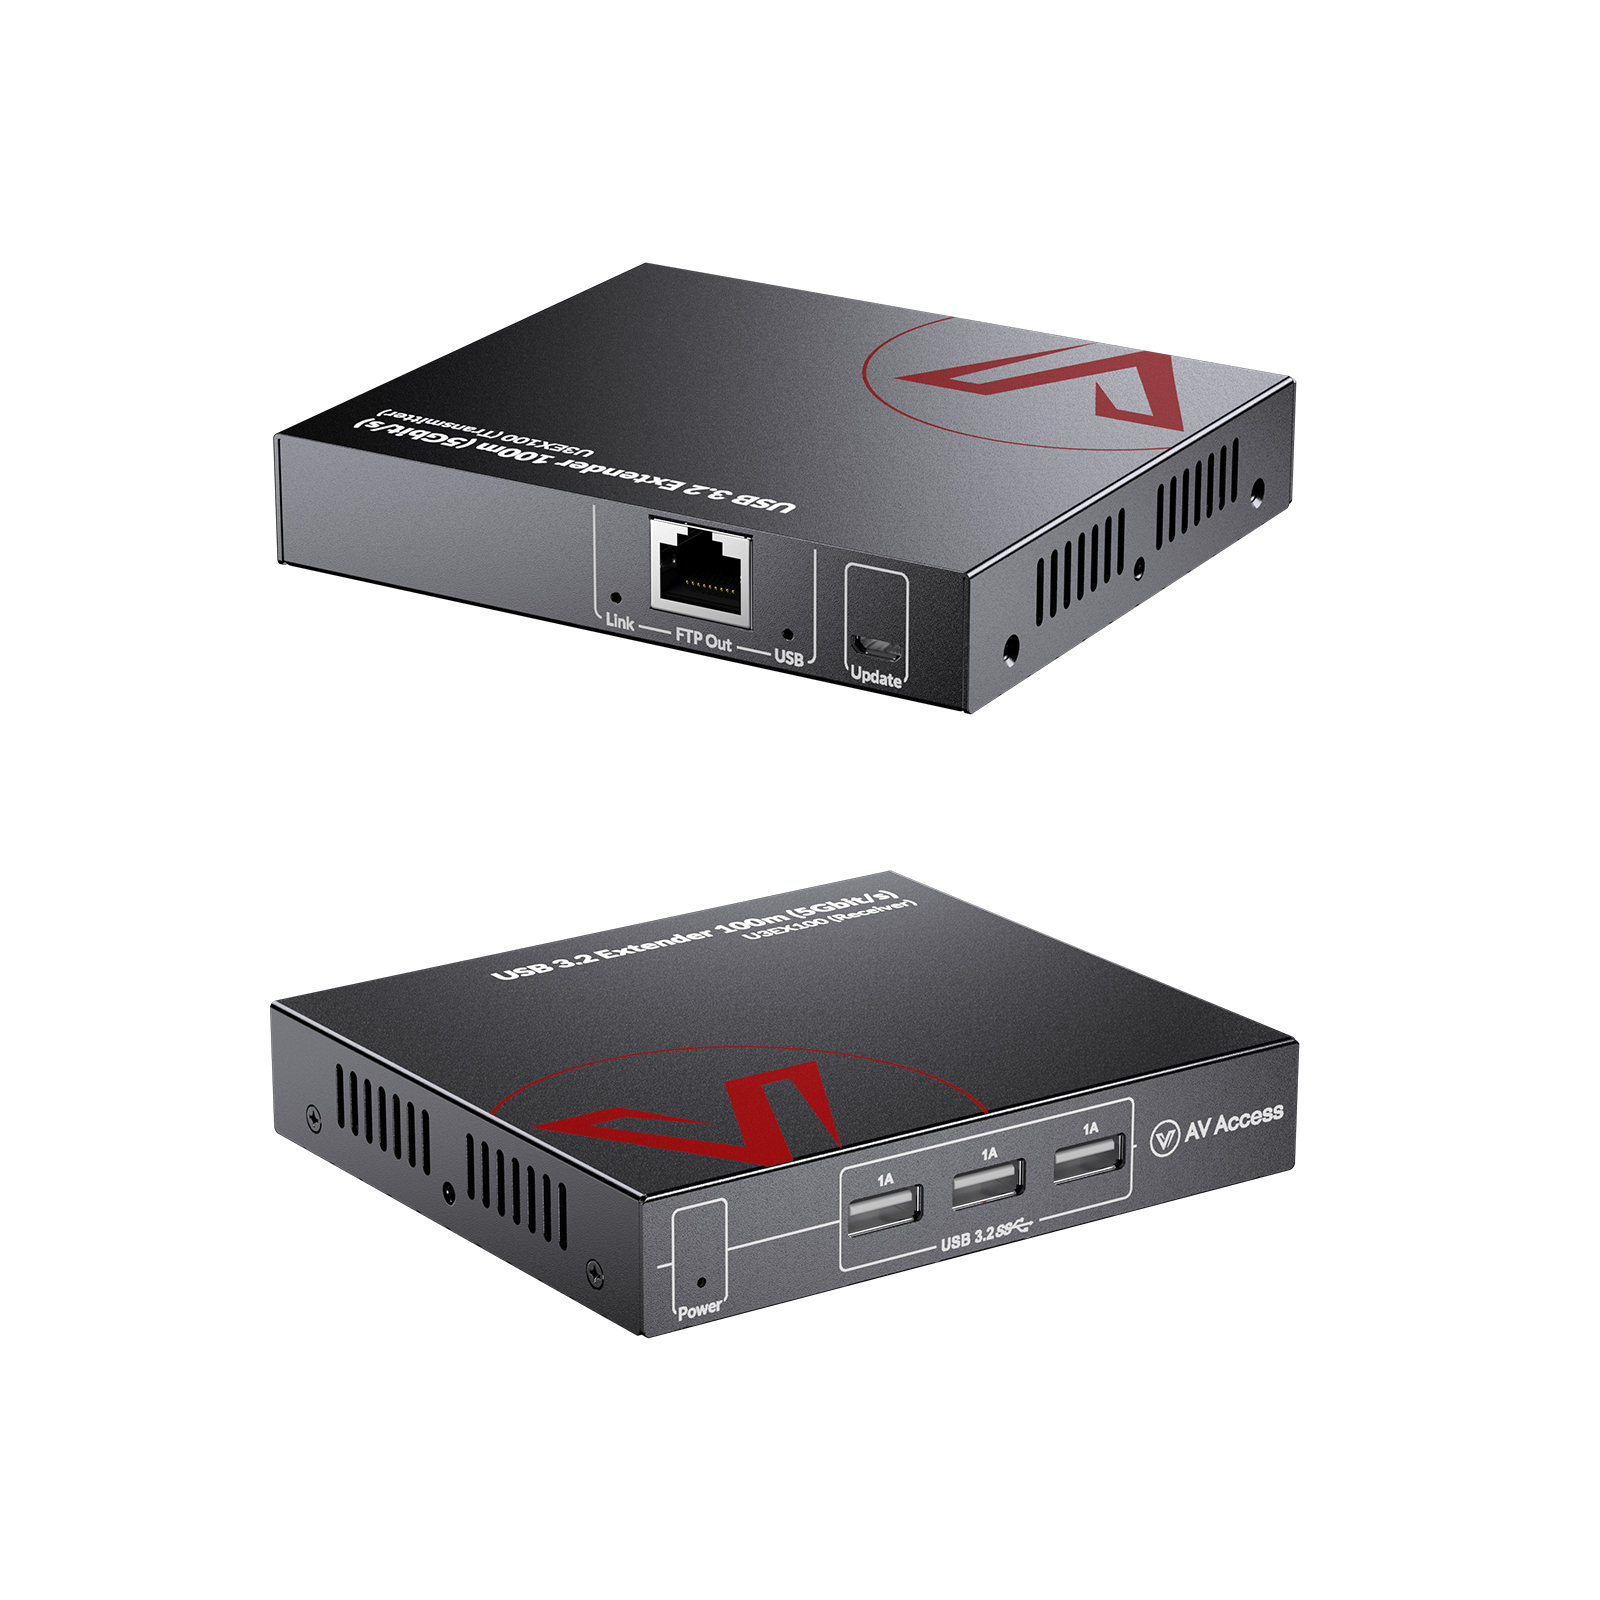 AV Access Launches the U3EX100 USB 3.2 Extender: Controlling Remote USB Devices with Zero Latency for Surveillance & Gaming